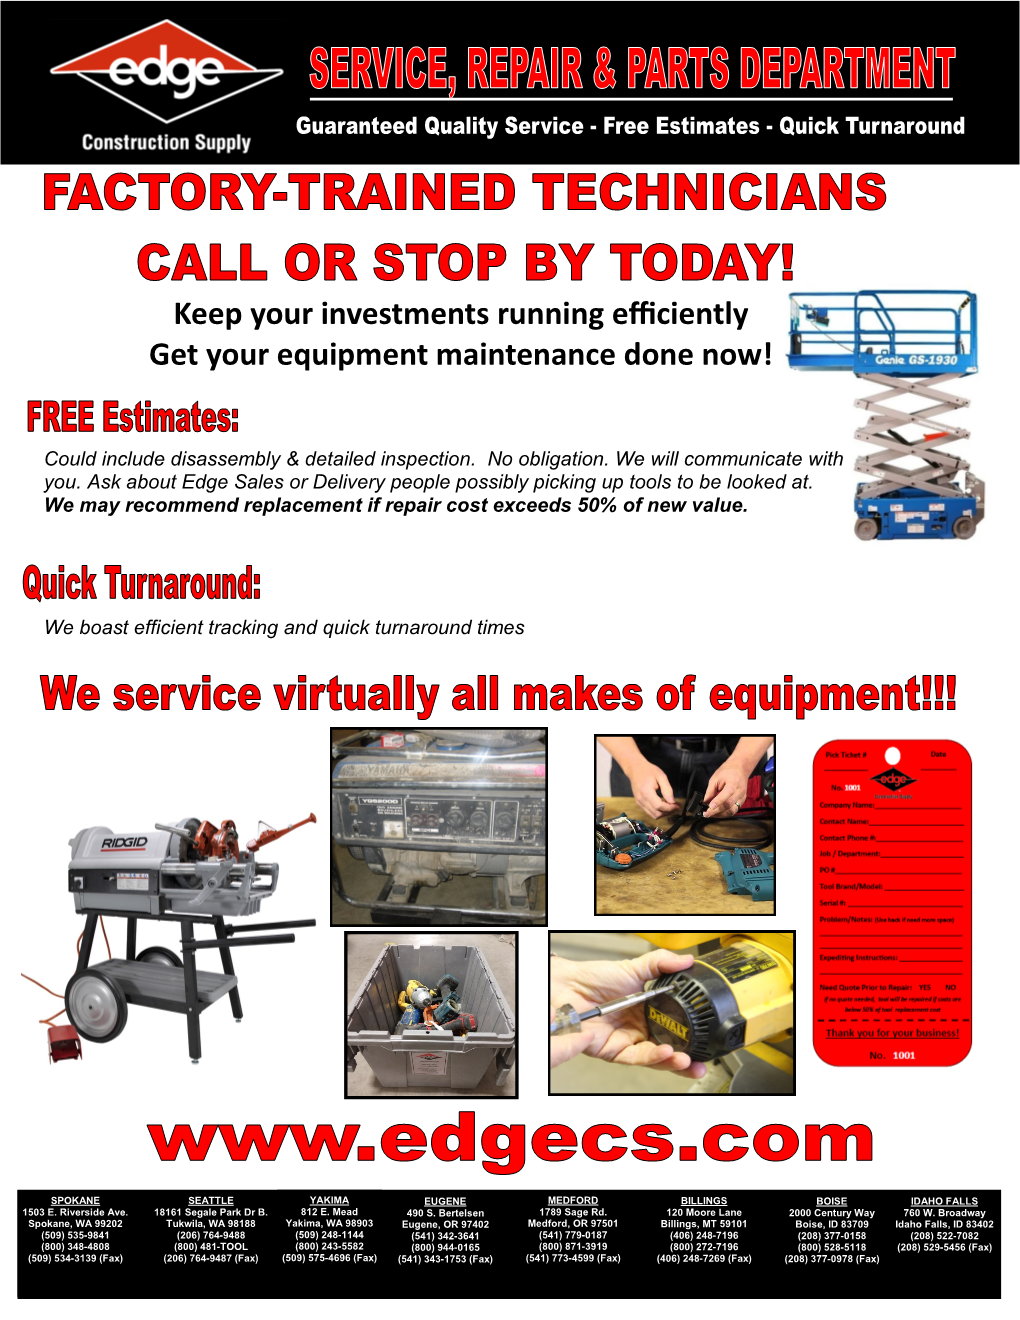 Keep Your Investments Running Efficiently Get Your Equipment Maintenance Done Now!